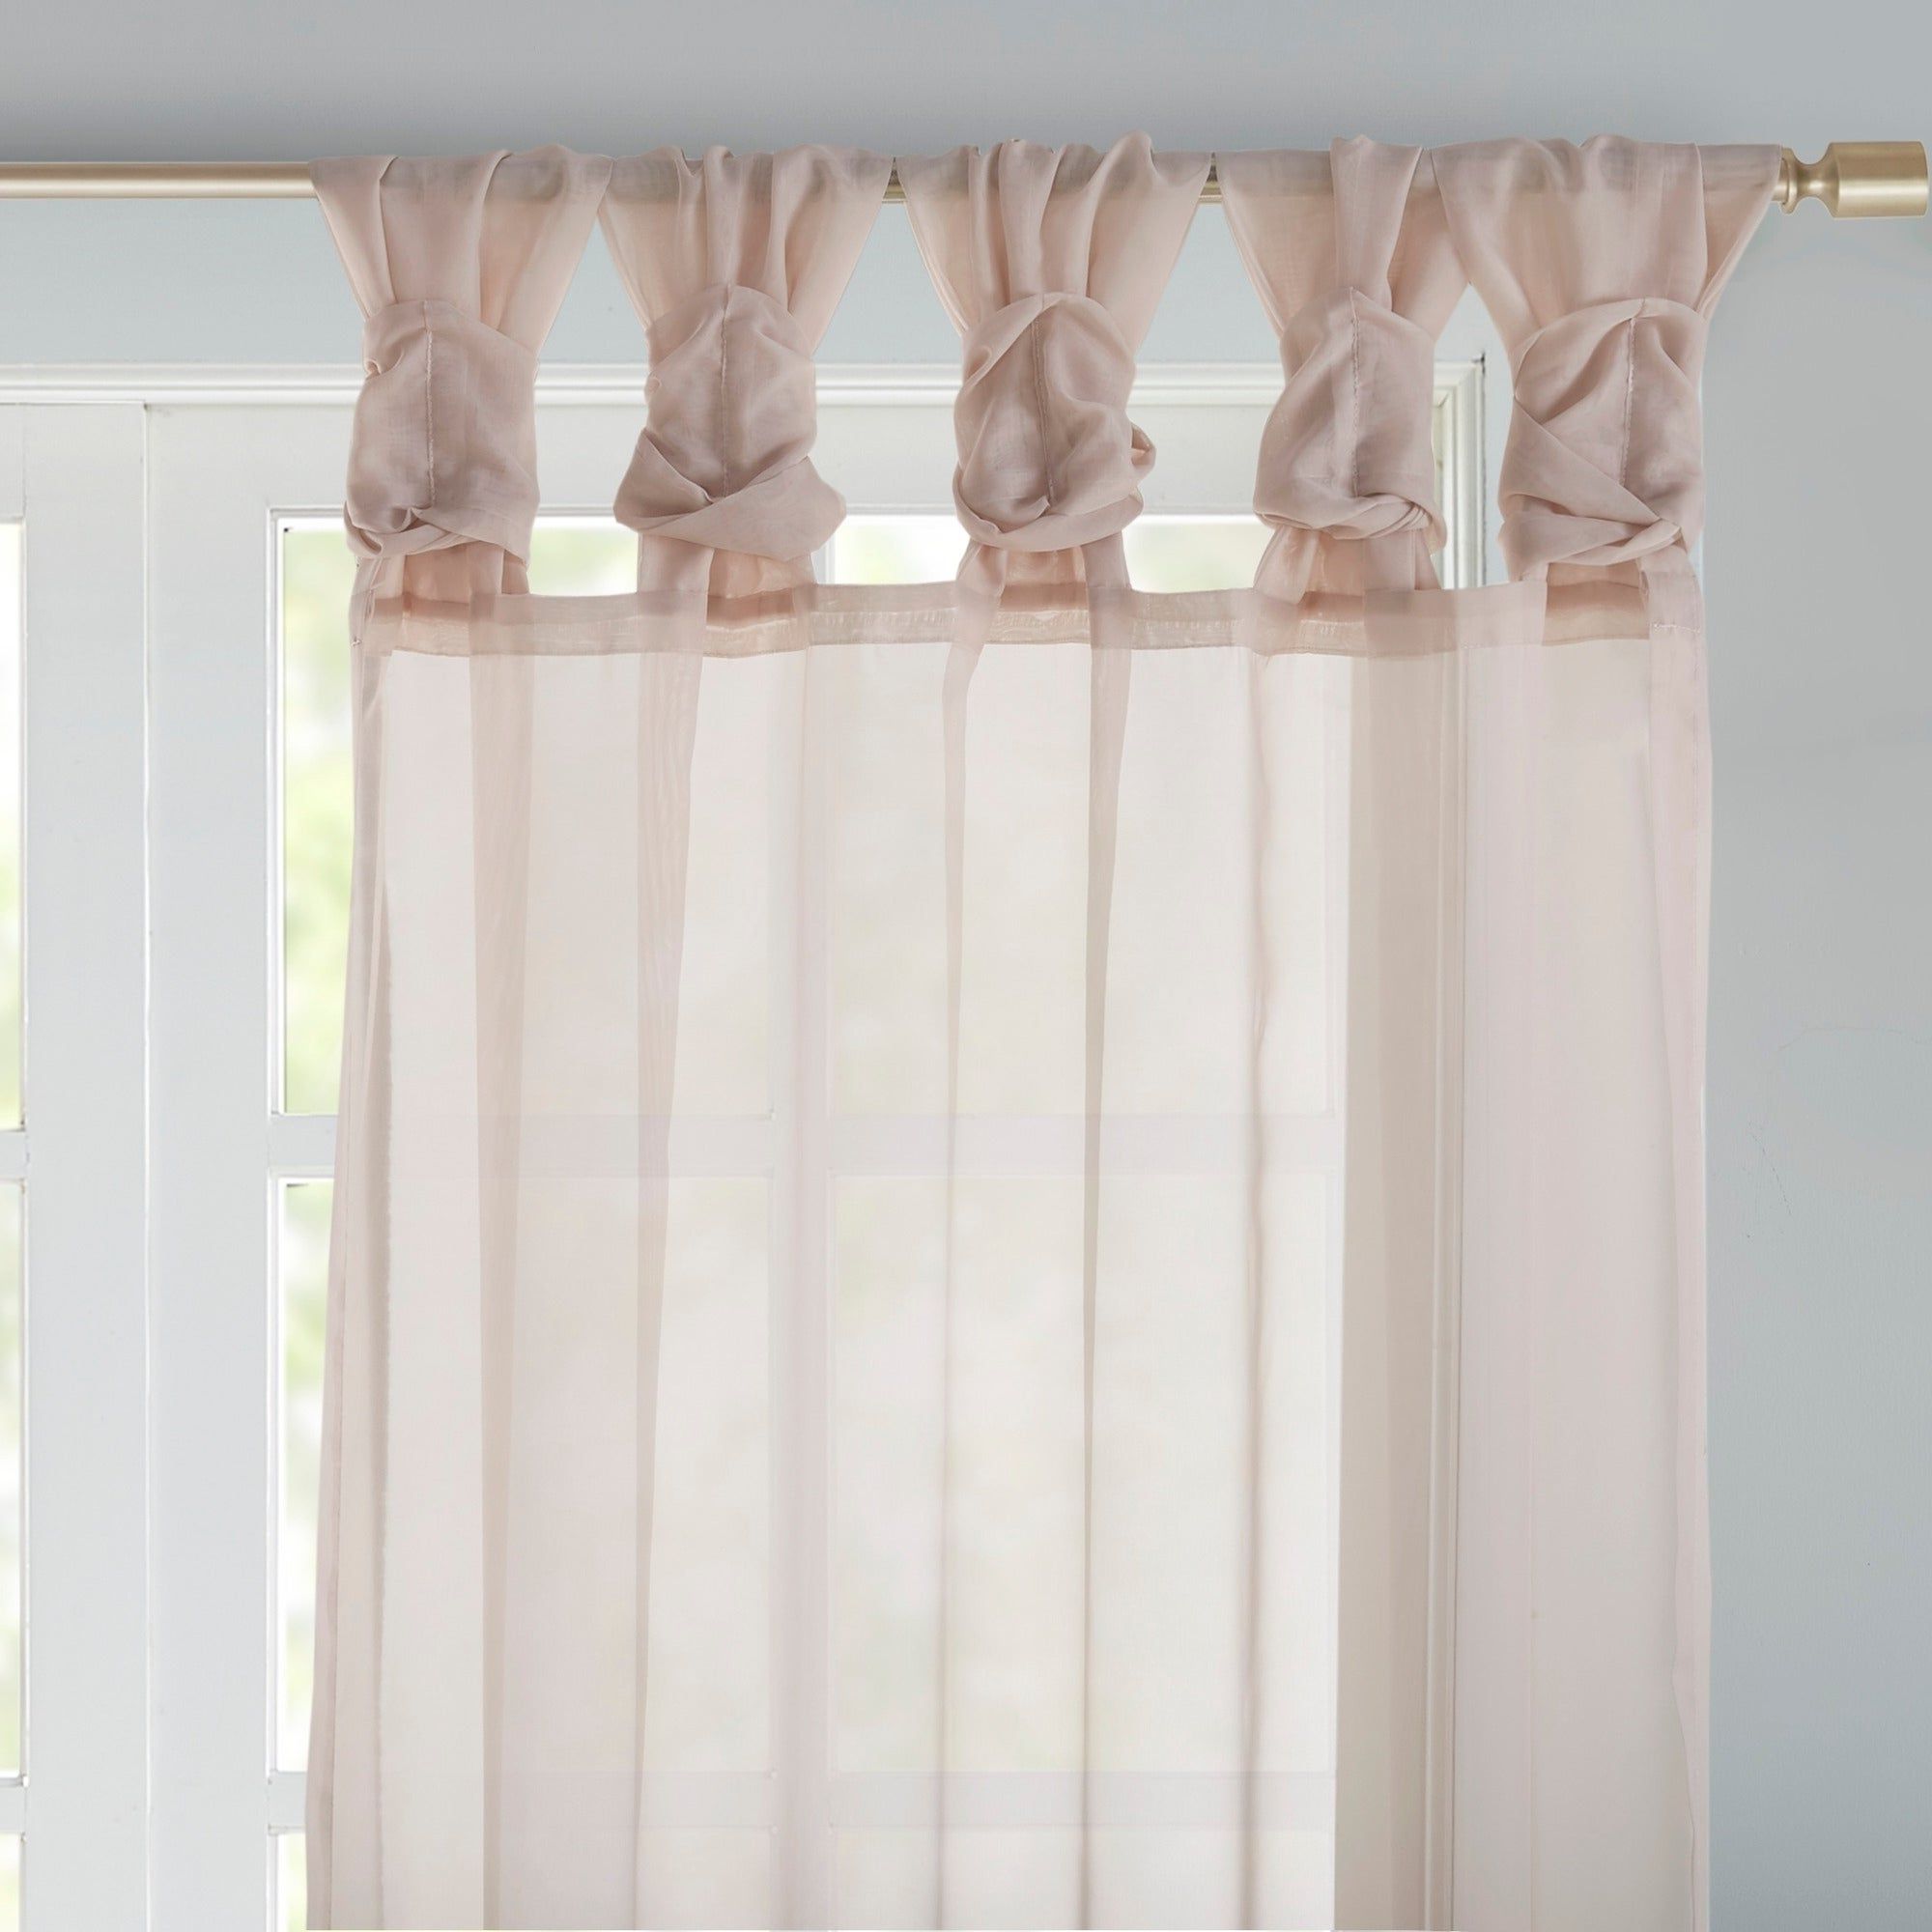 Elowen White Twist Tab Voile Sheer Curtain Panel Pairs Pertaining To Well Liked Madison Park Elowen White Twist Tab Voile Sheer Curtain Panel Pair (View 6 of 20)